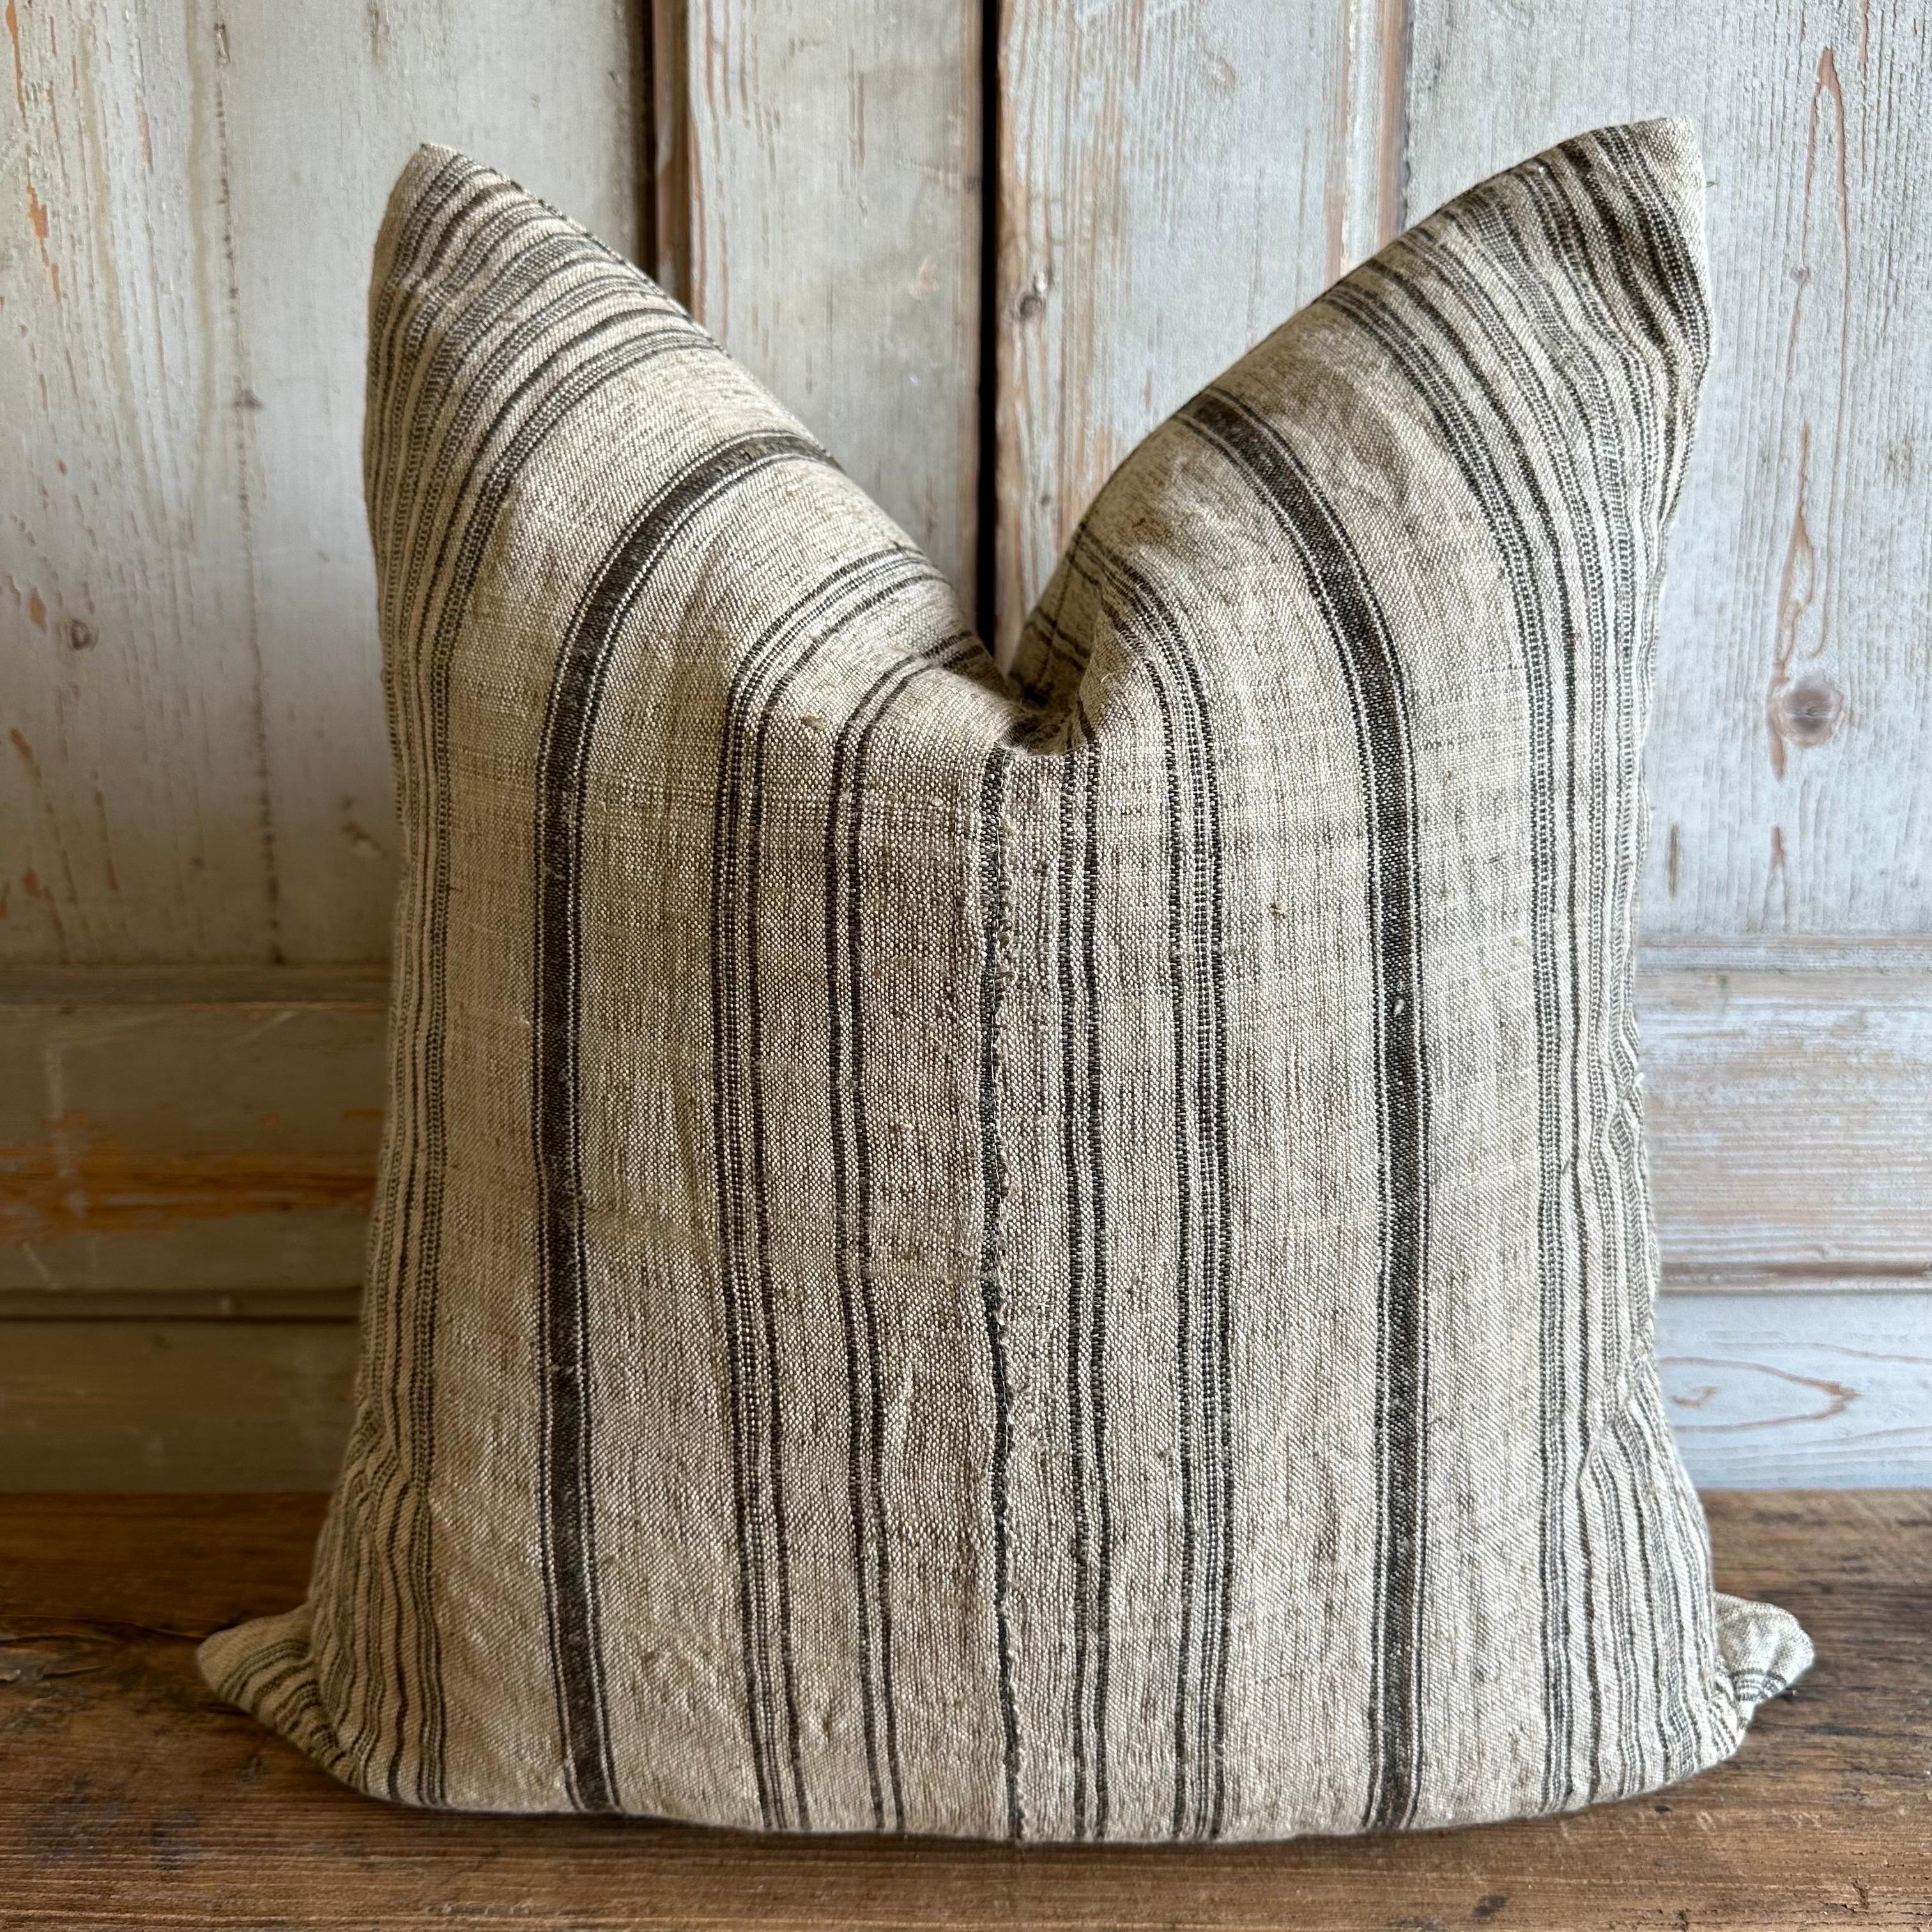 Custom Made french linen stripe accent pillows
Size: 22x22
Includes insert 10/90 down feather
Color: Oat brown with dark espresso colored stripes
Brass zipper closure
Dry clean recommended. 
Spot clean only when needed.